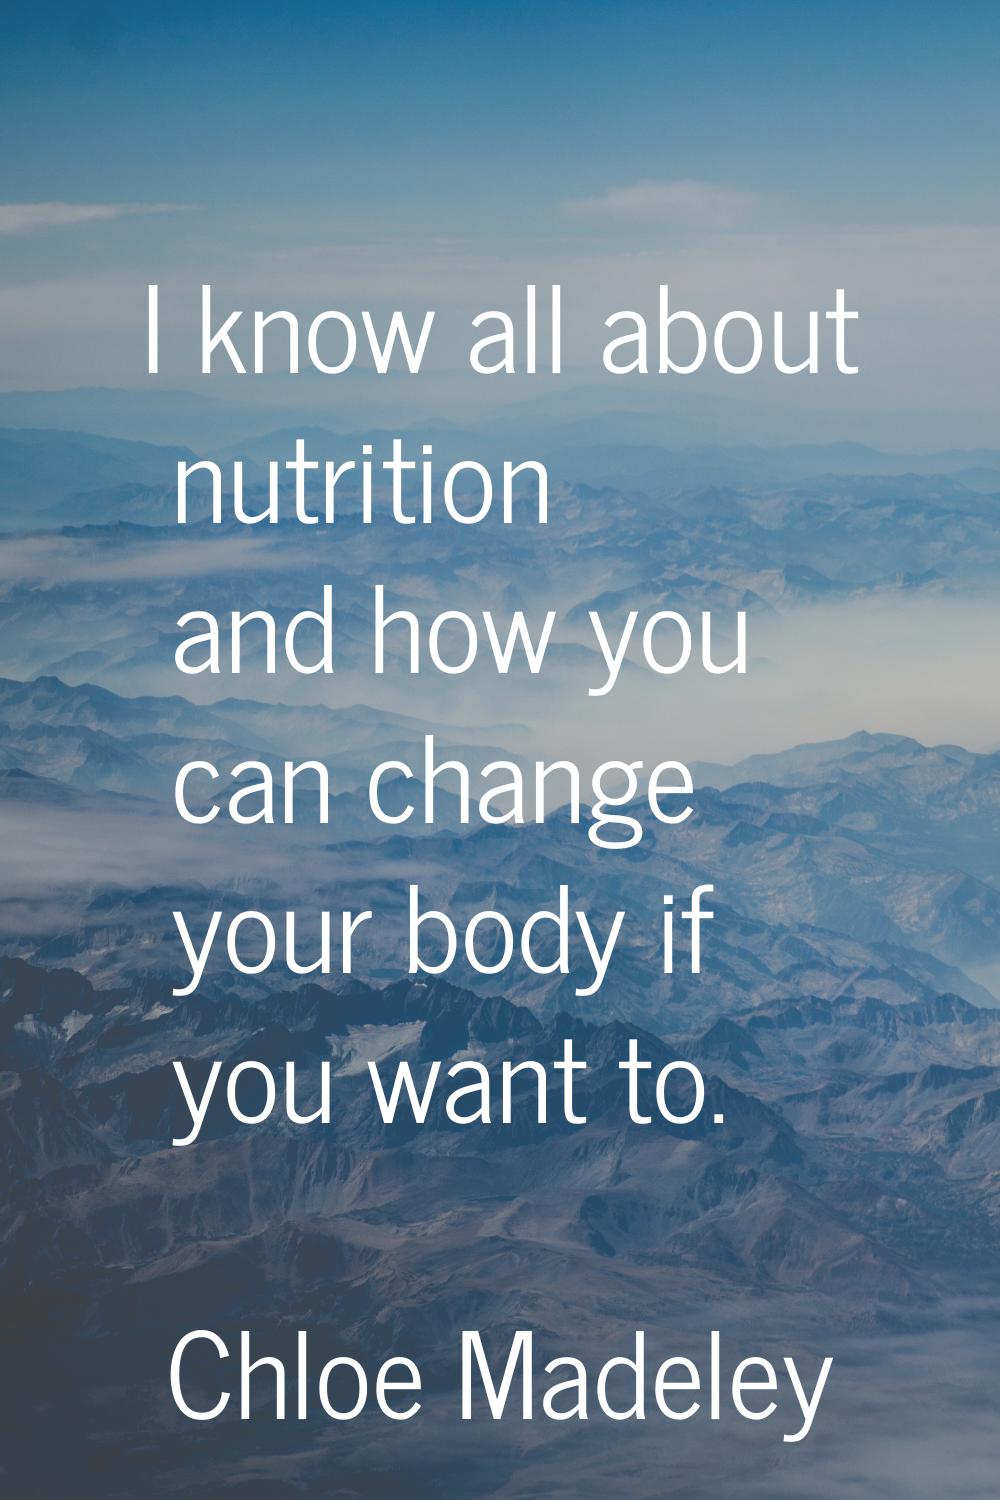 I know all about nutrition and how you can change your body if you want to.